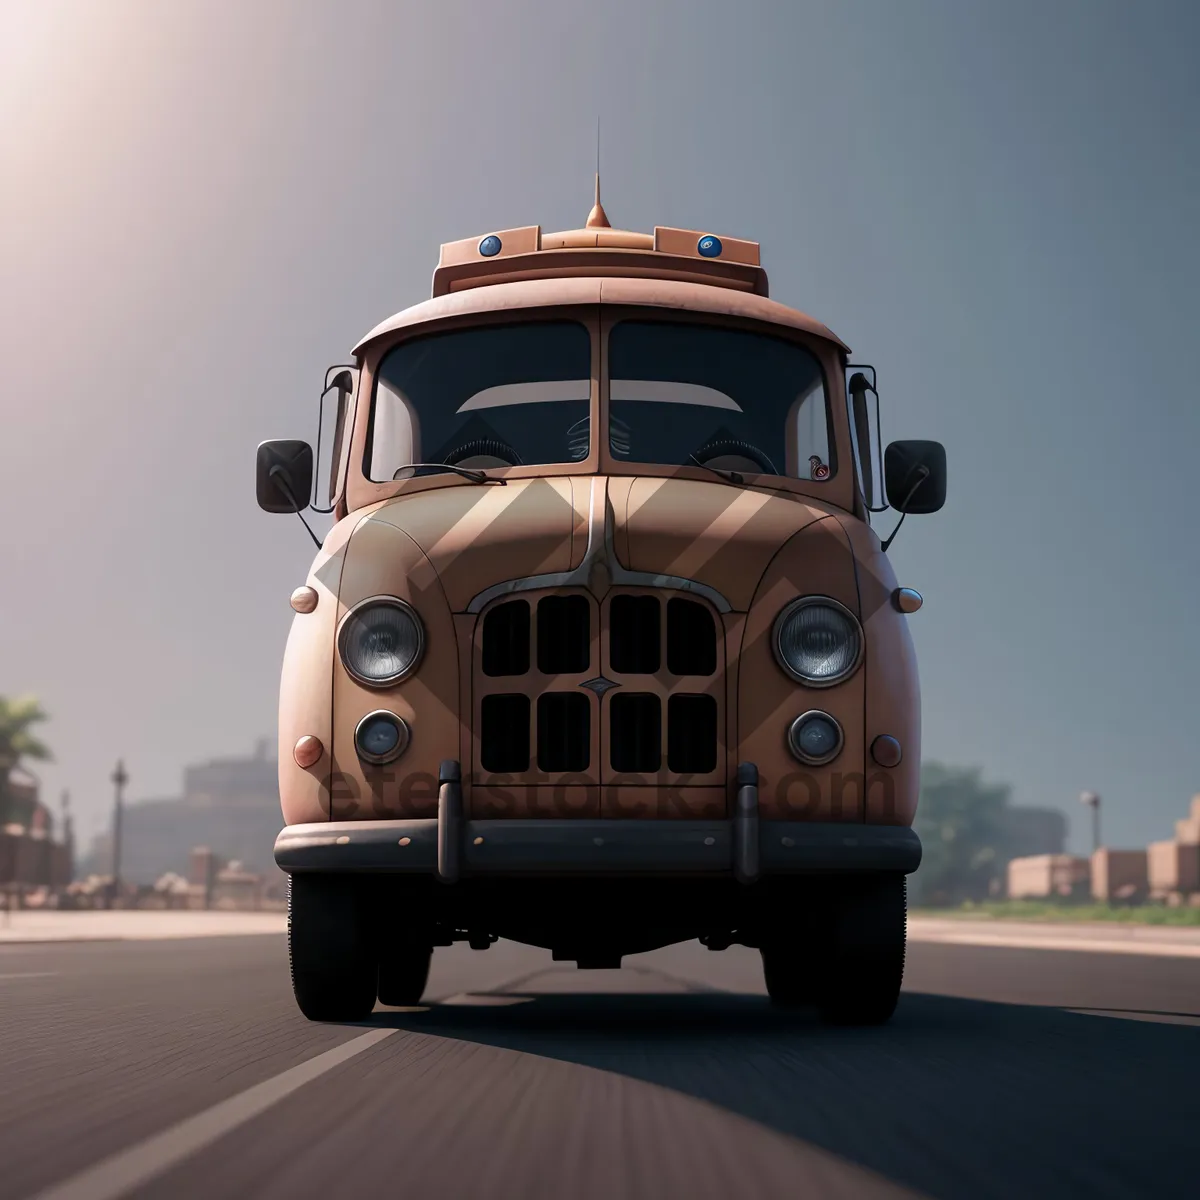 Picture of Public Transport: School Bus on Highway